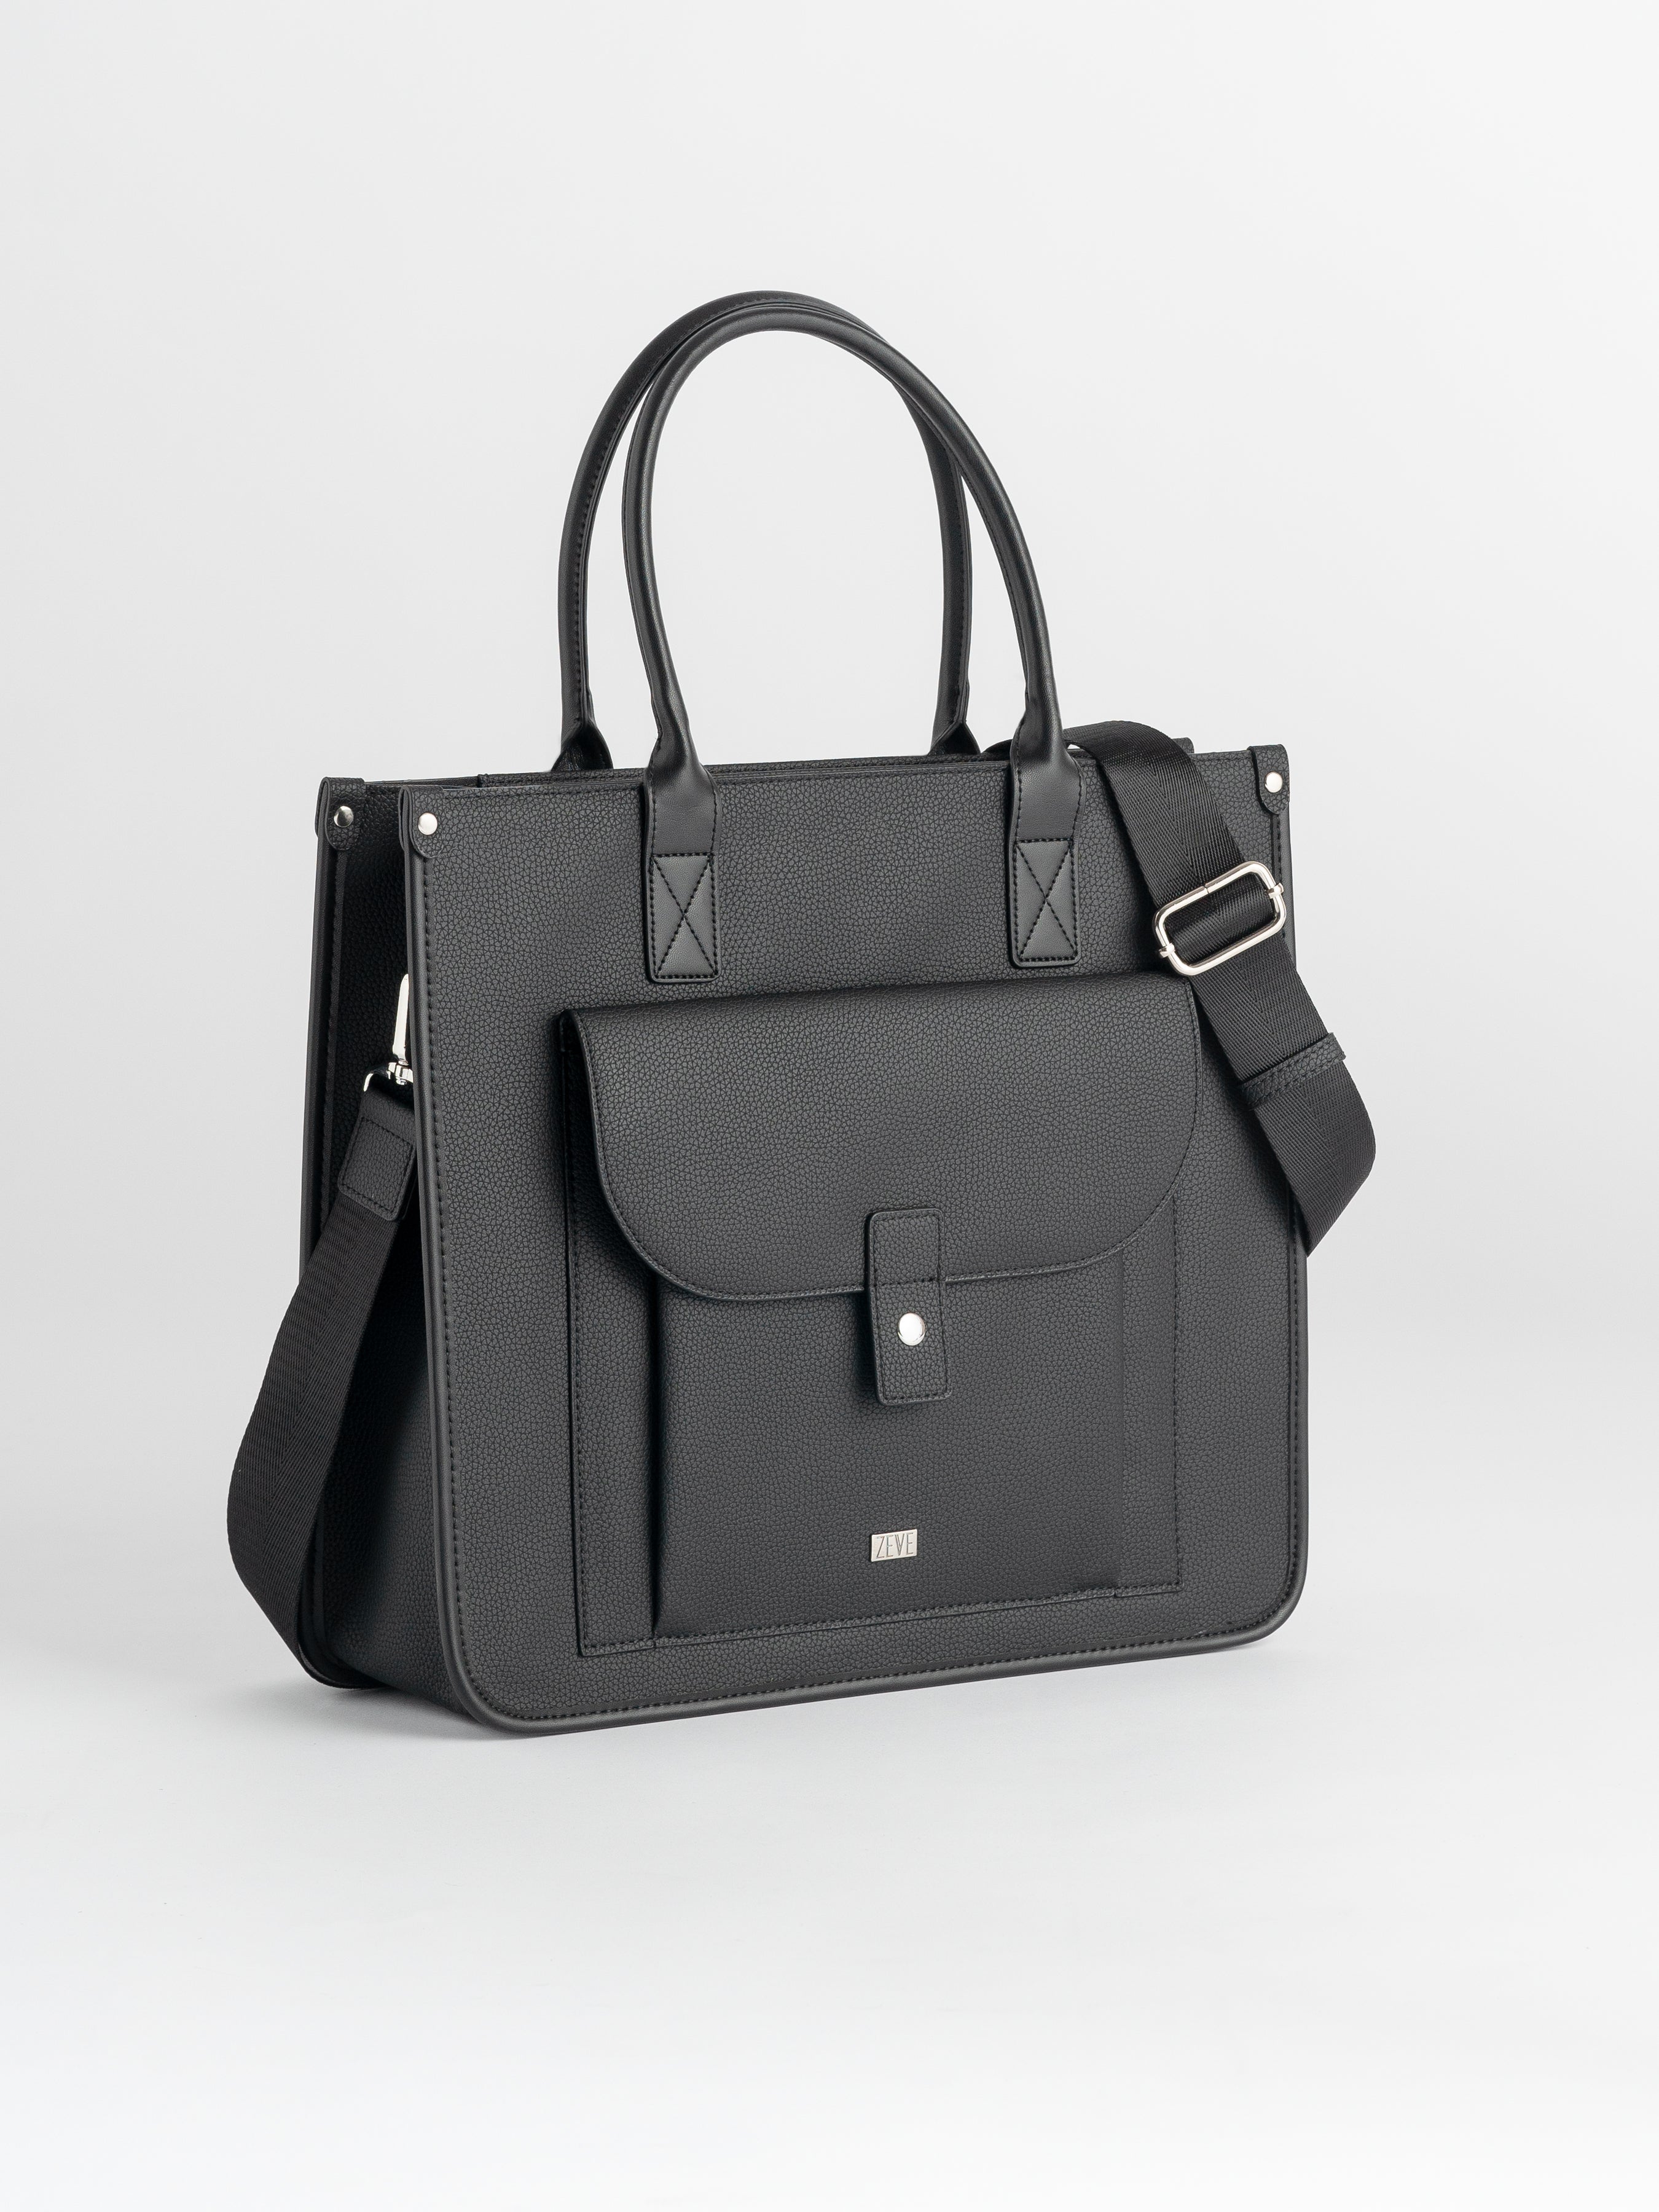 Ares Tote Bag With Zipper - Black Pebble